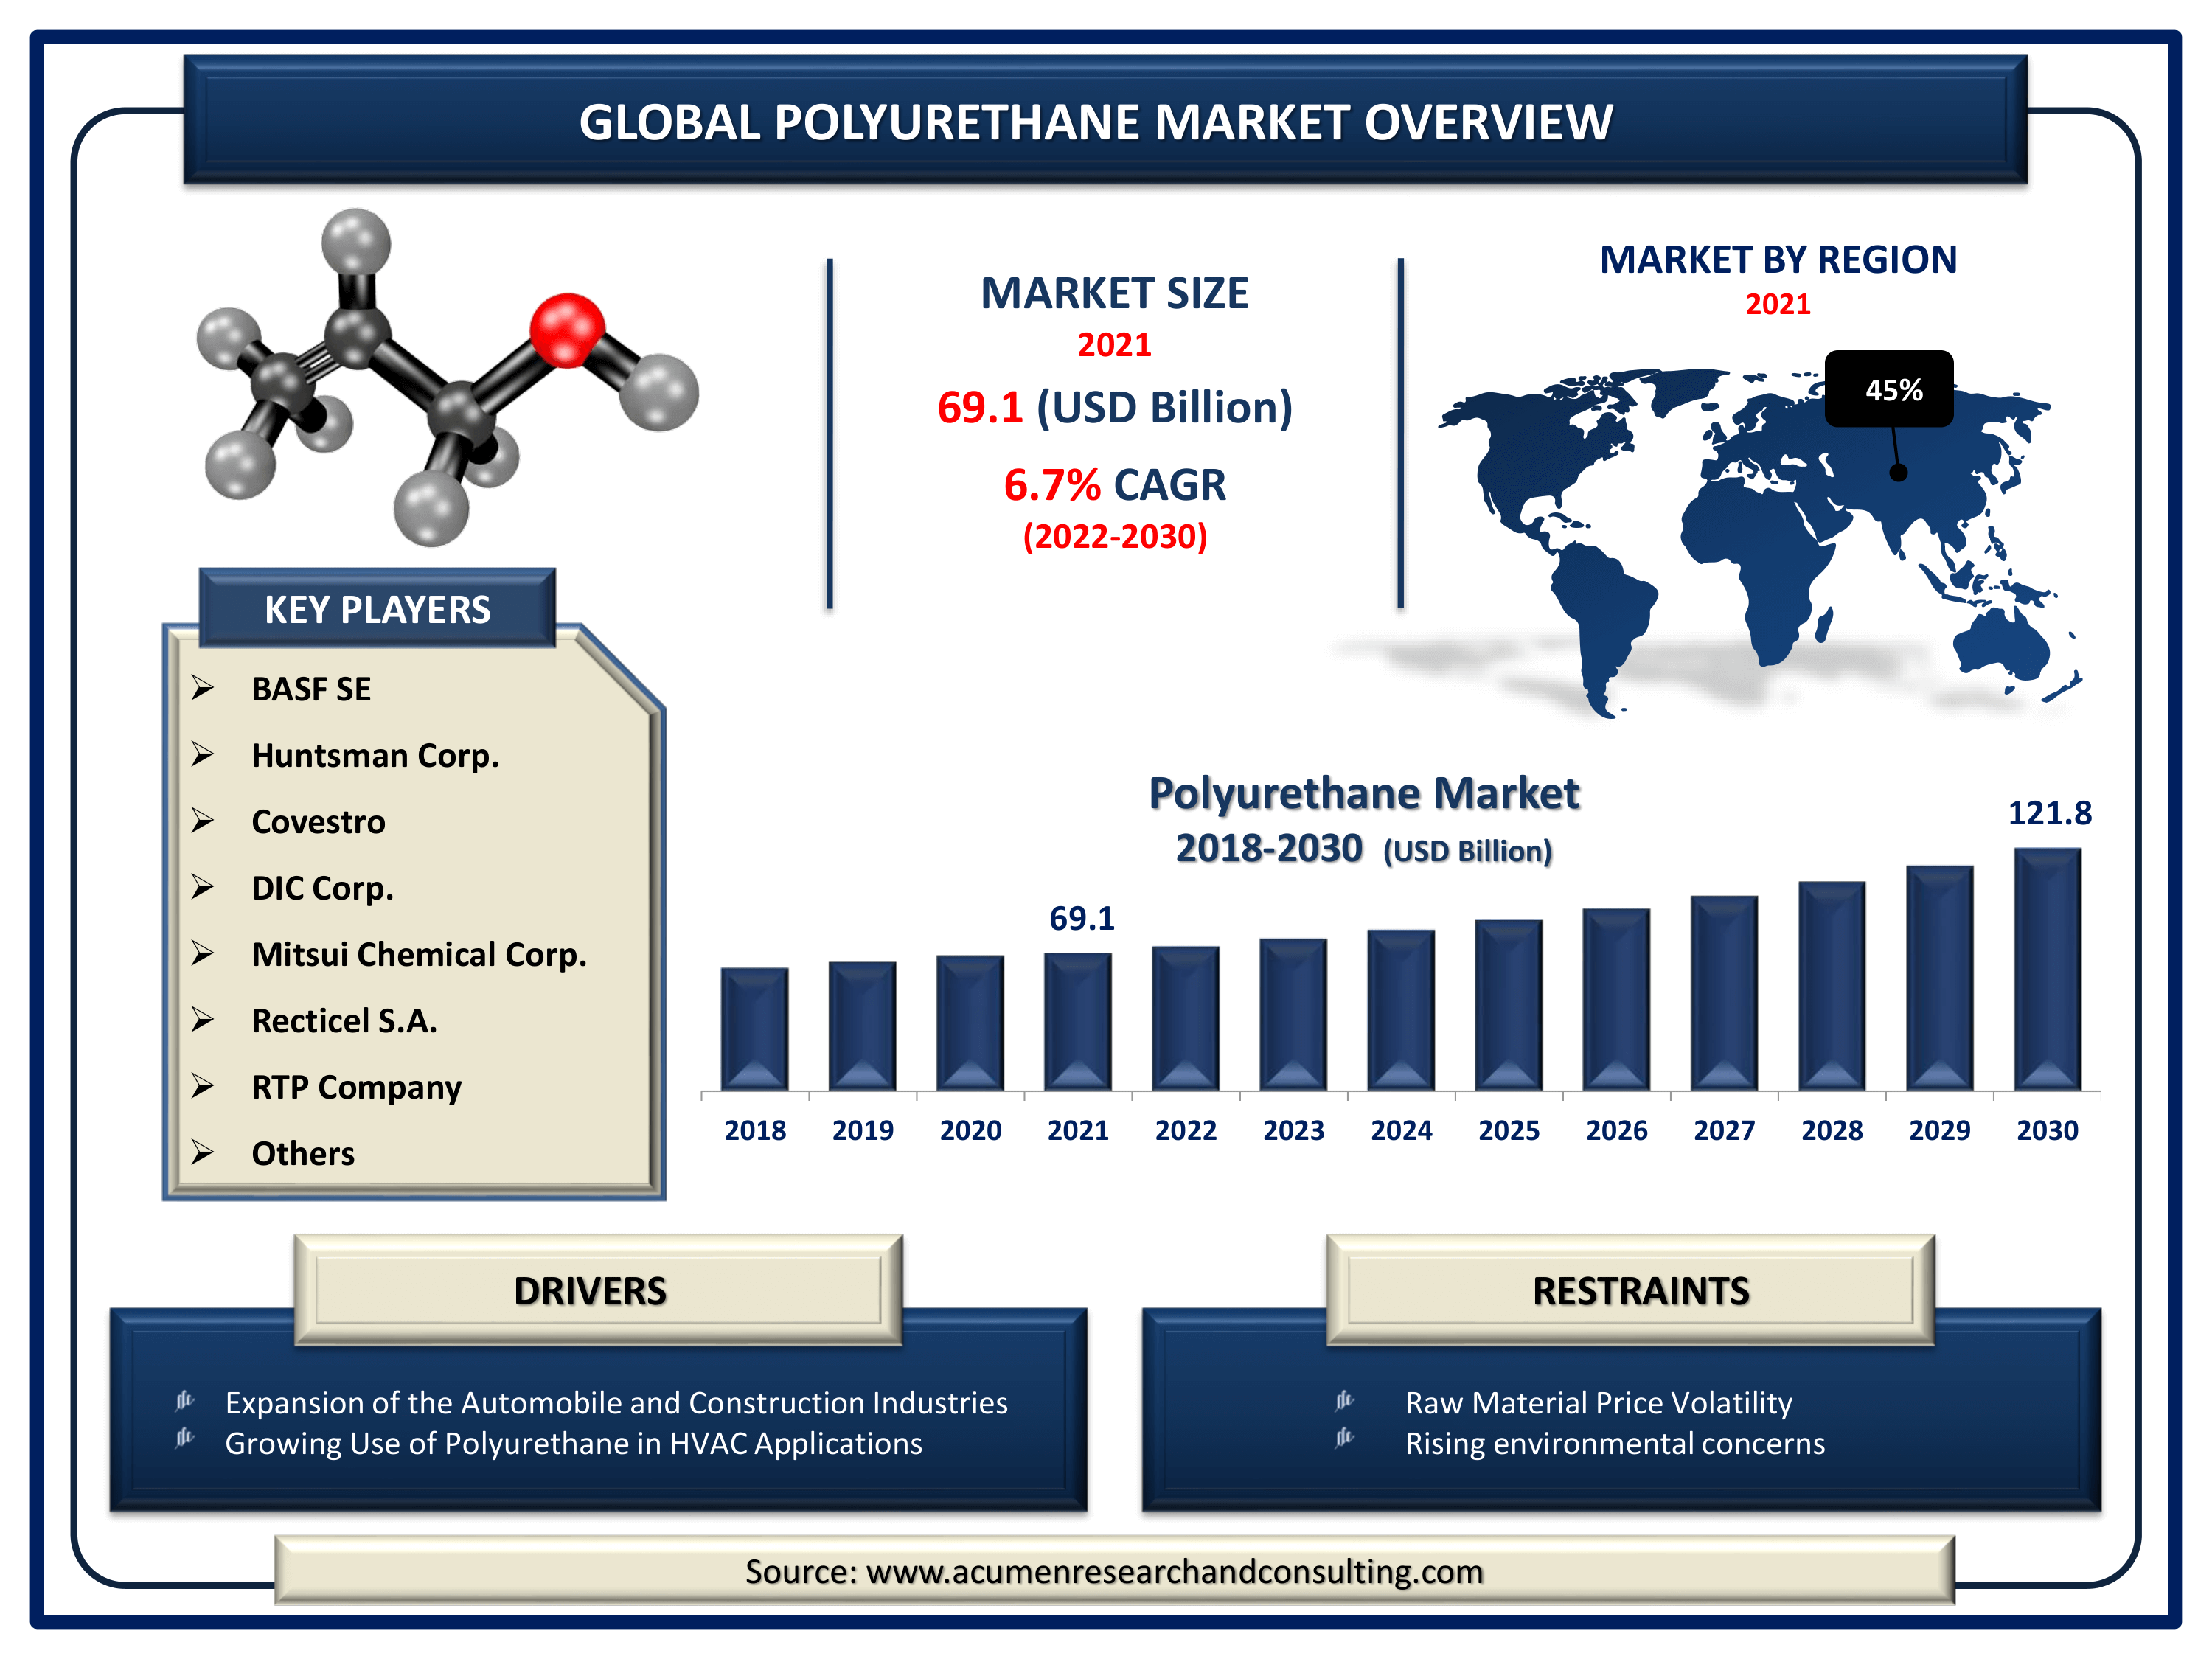 Global Polyurethane market value is estimated to expand by USD 121.8 billion by 2030, with a 6.7% CAGR from 2022 to 2030